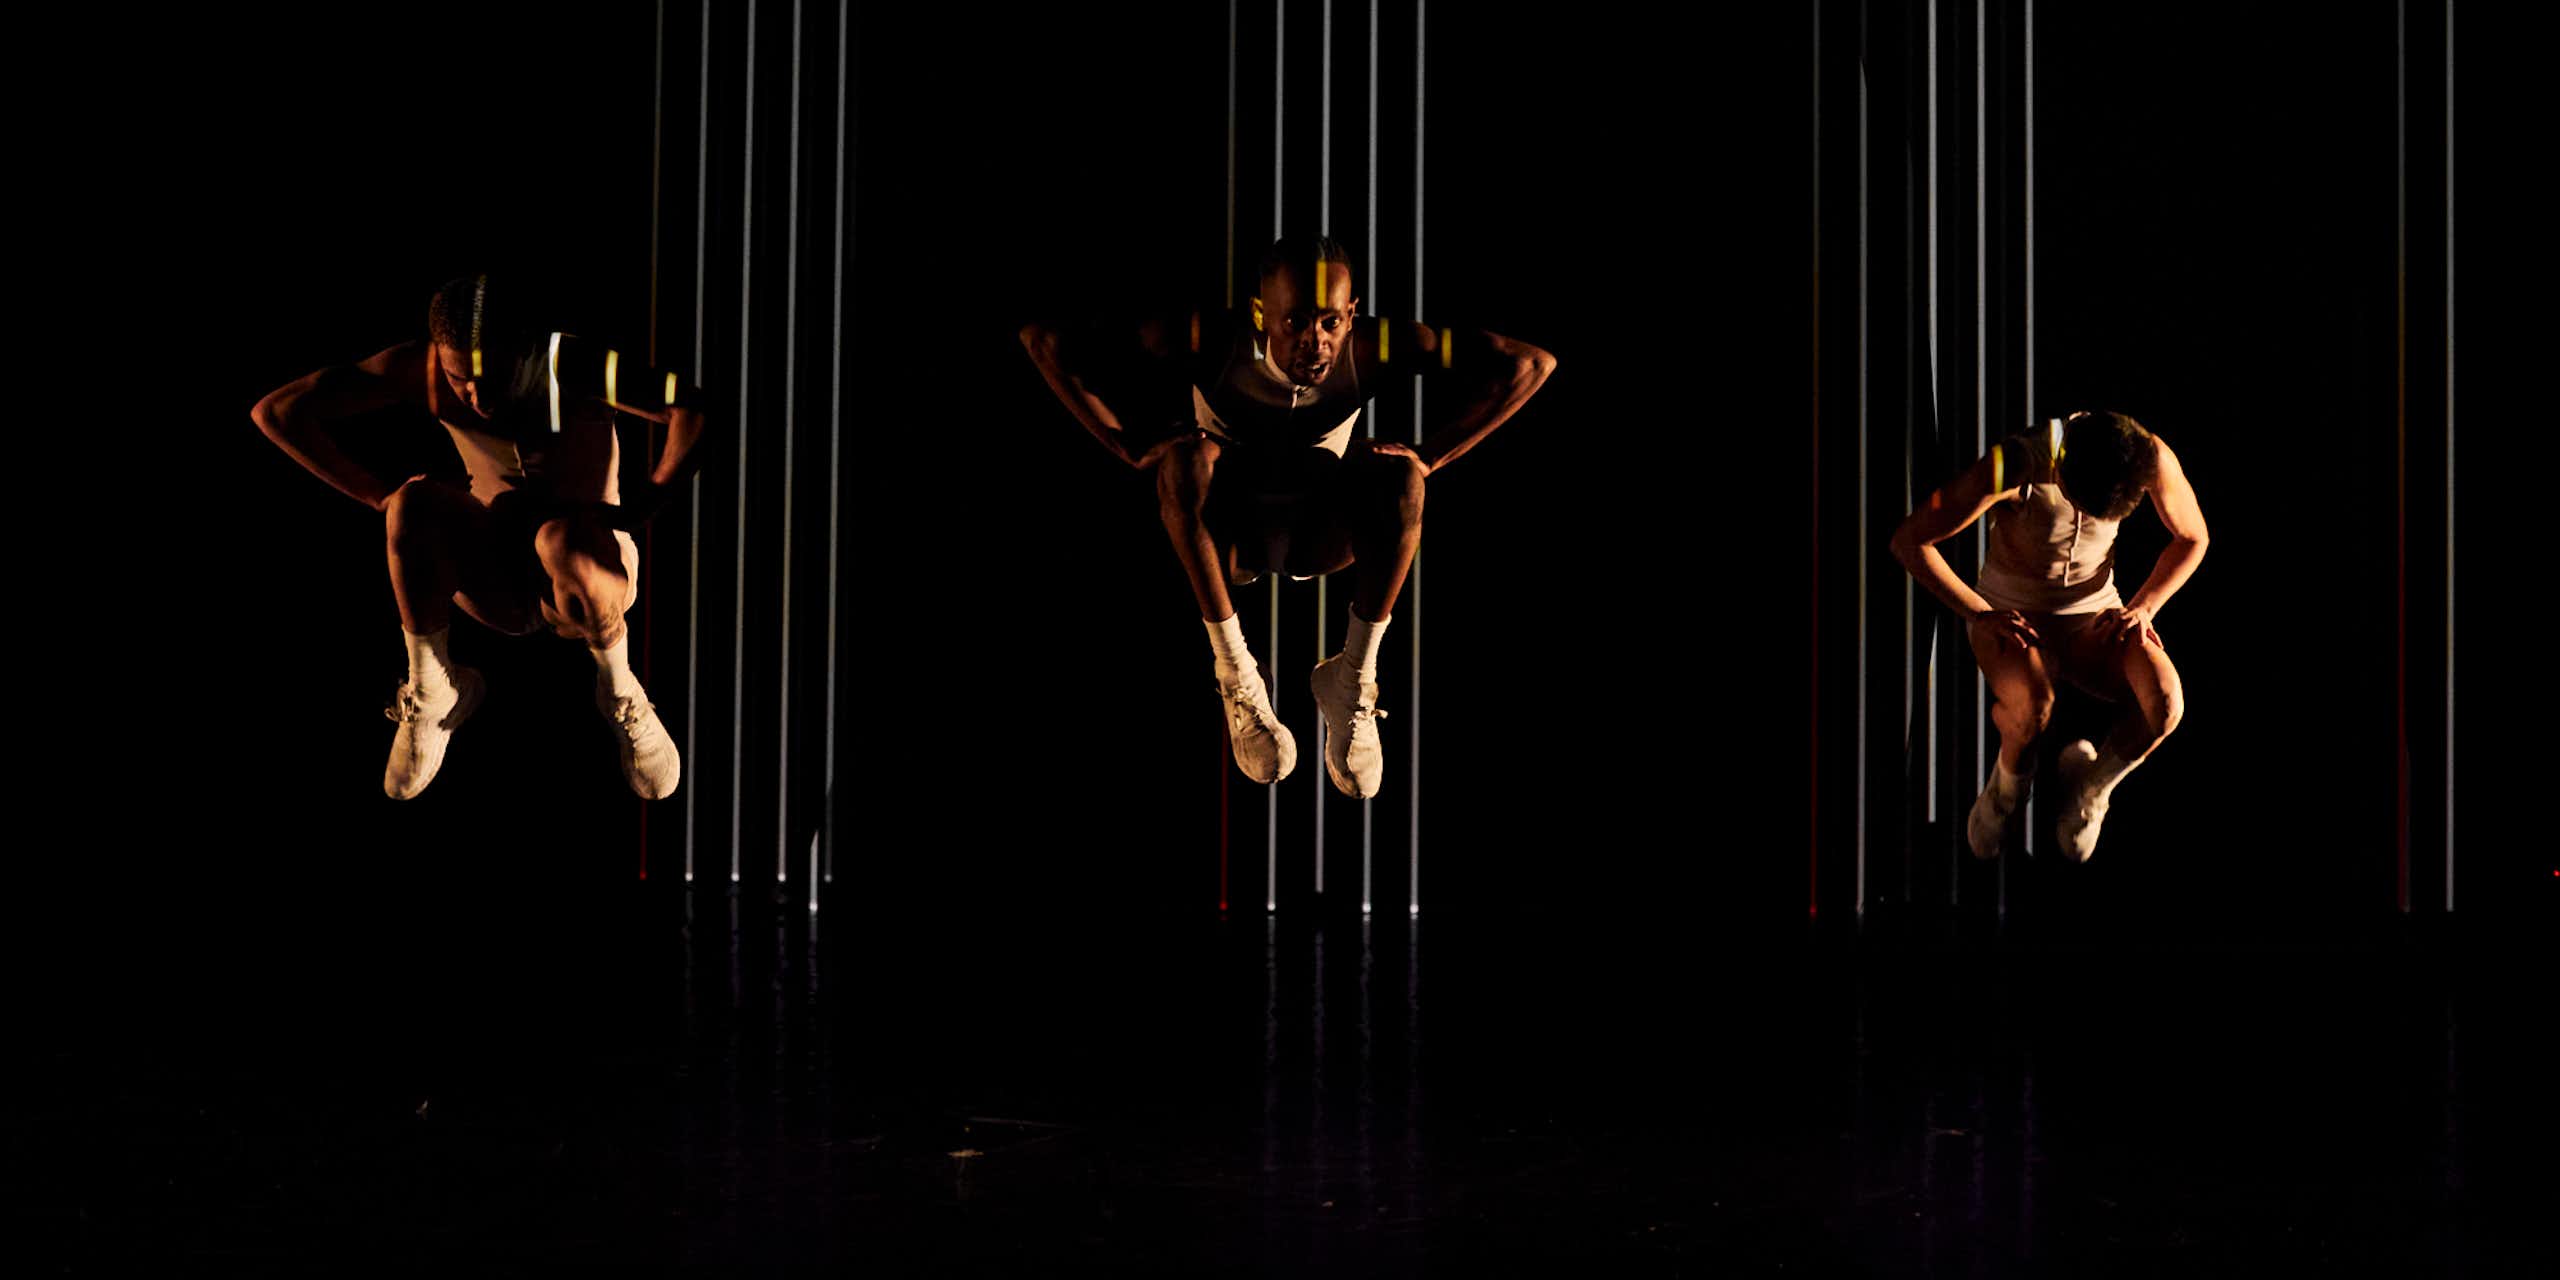 Three dancers against a black backdrop, suspended in the air.